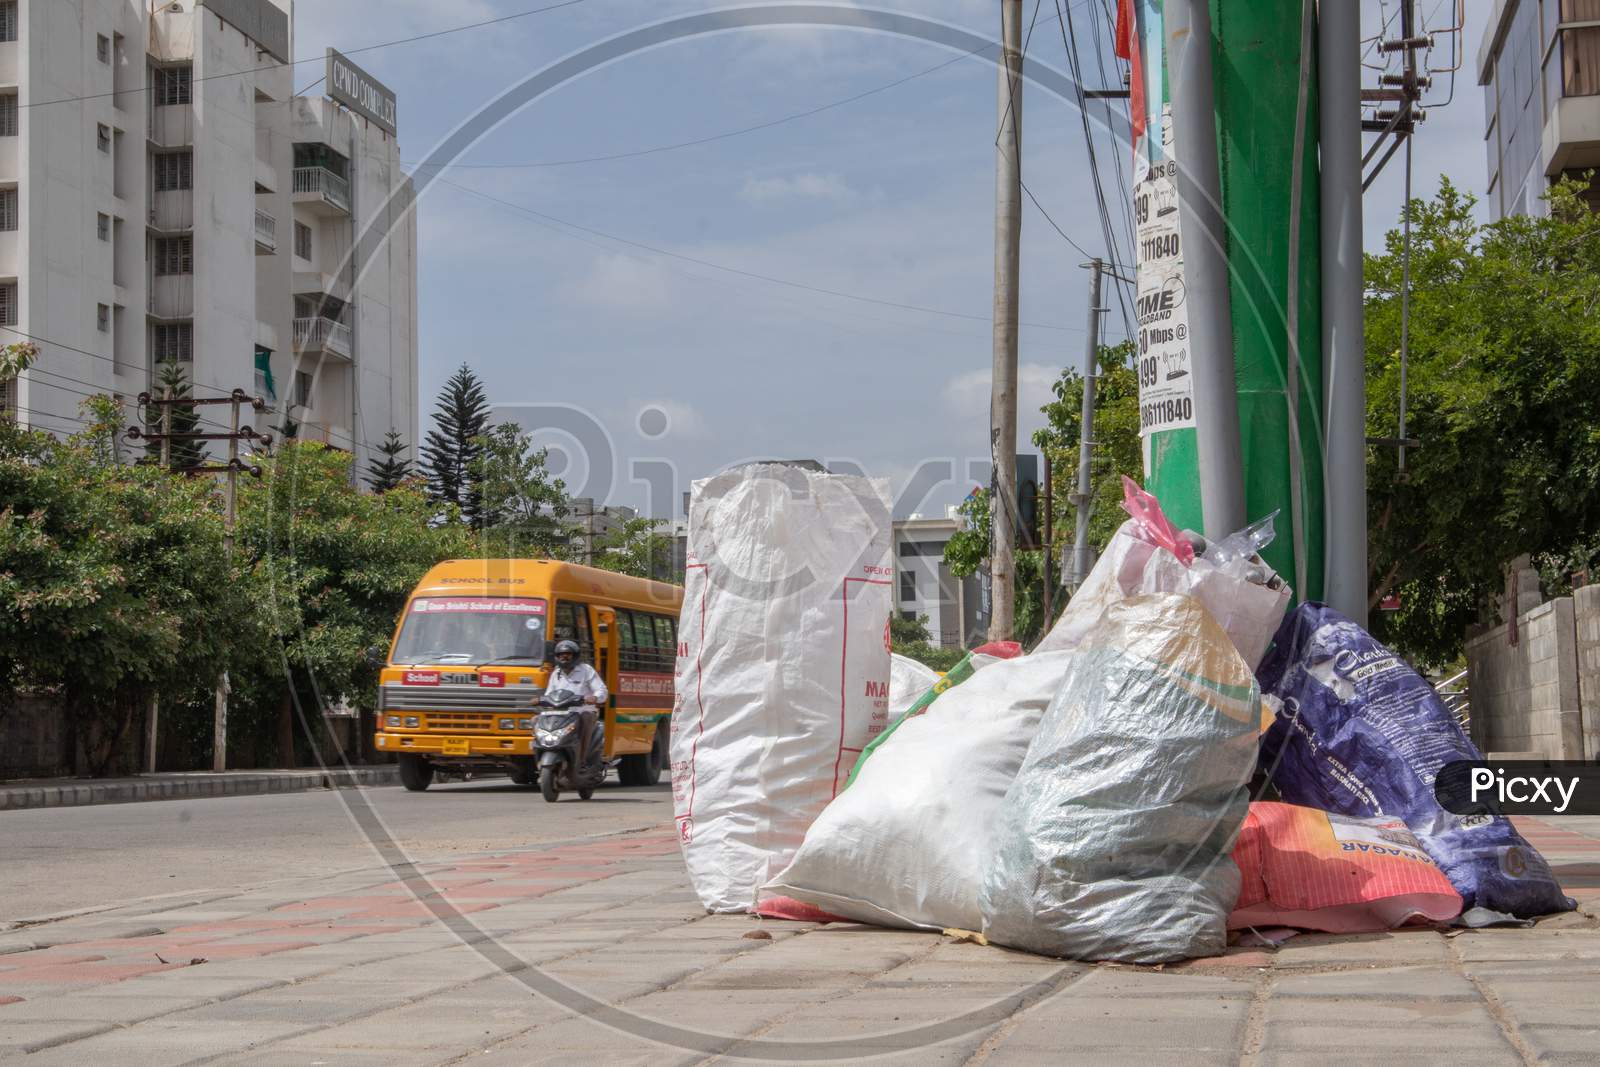 Bengaluru, India June 27, 2019 : Bags Of Rubbish Lie On The Footpath Of The Road. A Bunch Of Trash Thrown On The Road, Environmental Pollution. Garbage Problem At Bengaluru, India